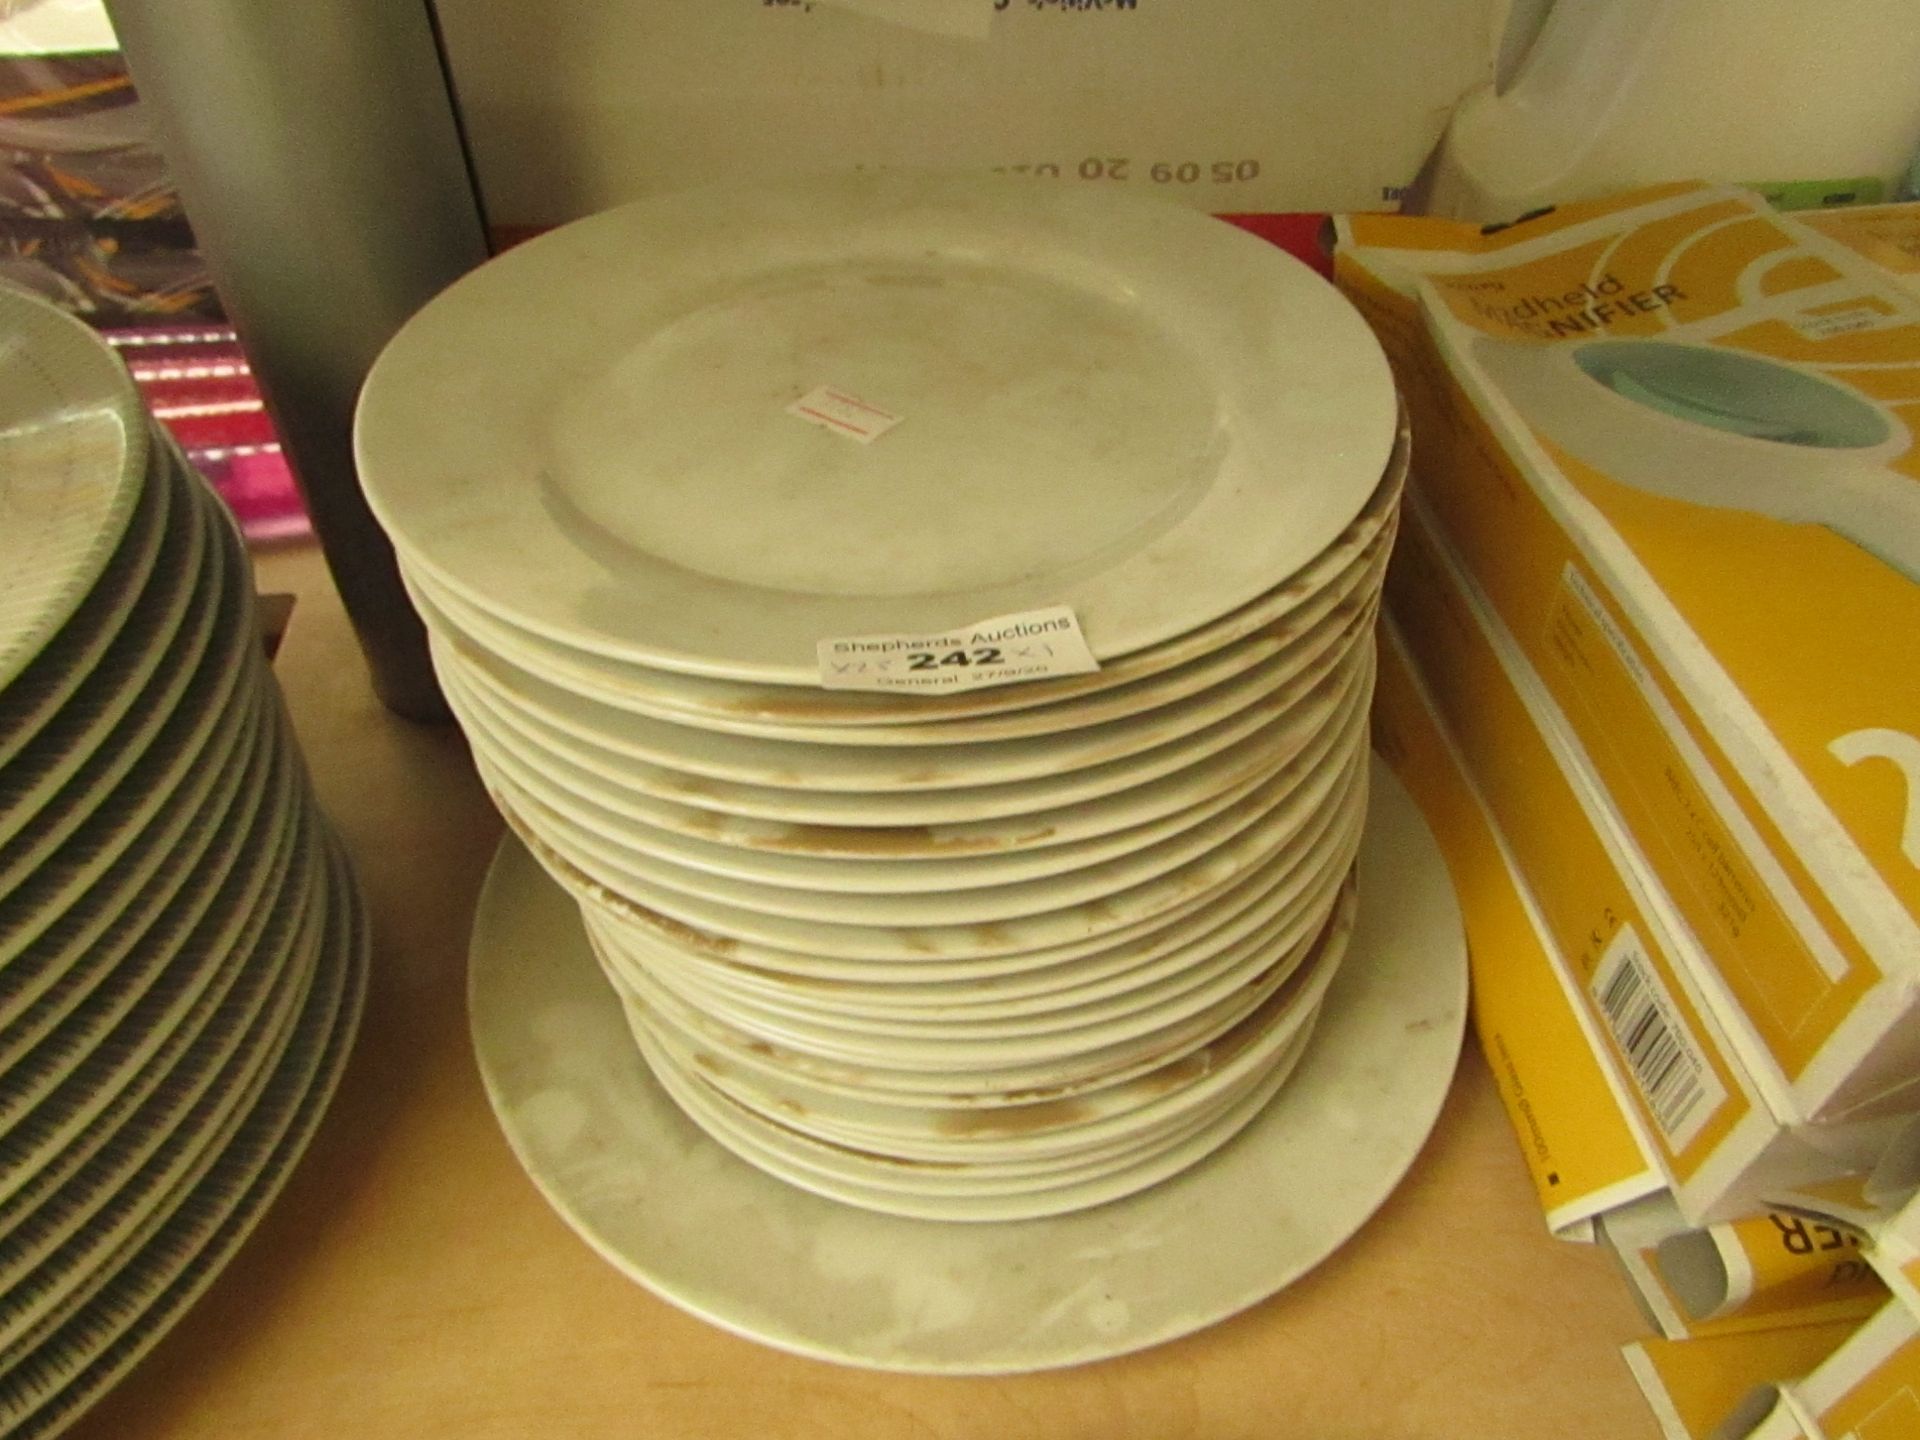 23x Small White Plates - Need A Wash. 1x Large White Plate - Need A Wash.